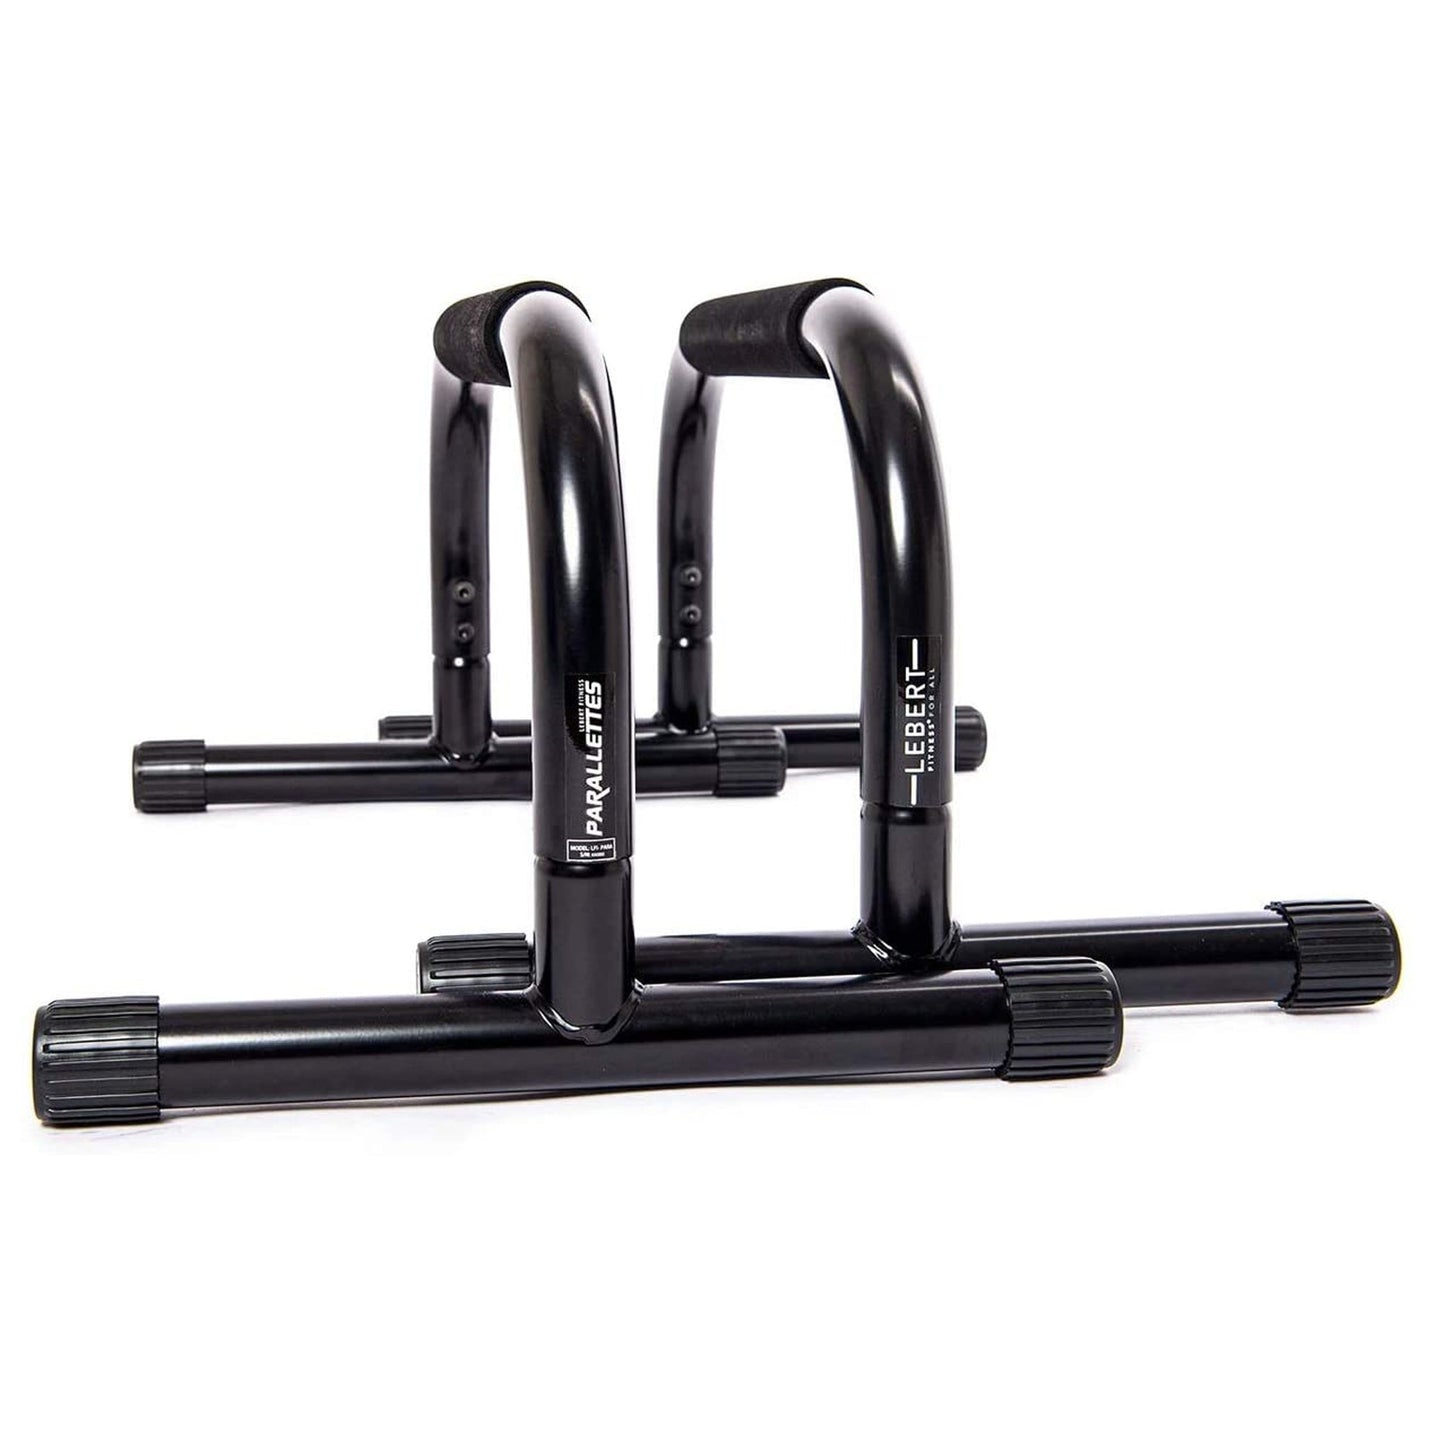 Lebert Fitness Parallettes Push Up Dip Stand (12''H x 25''L x 16''W)